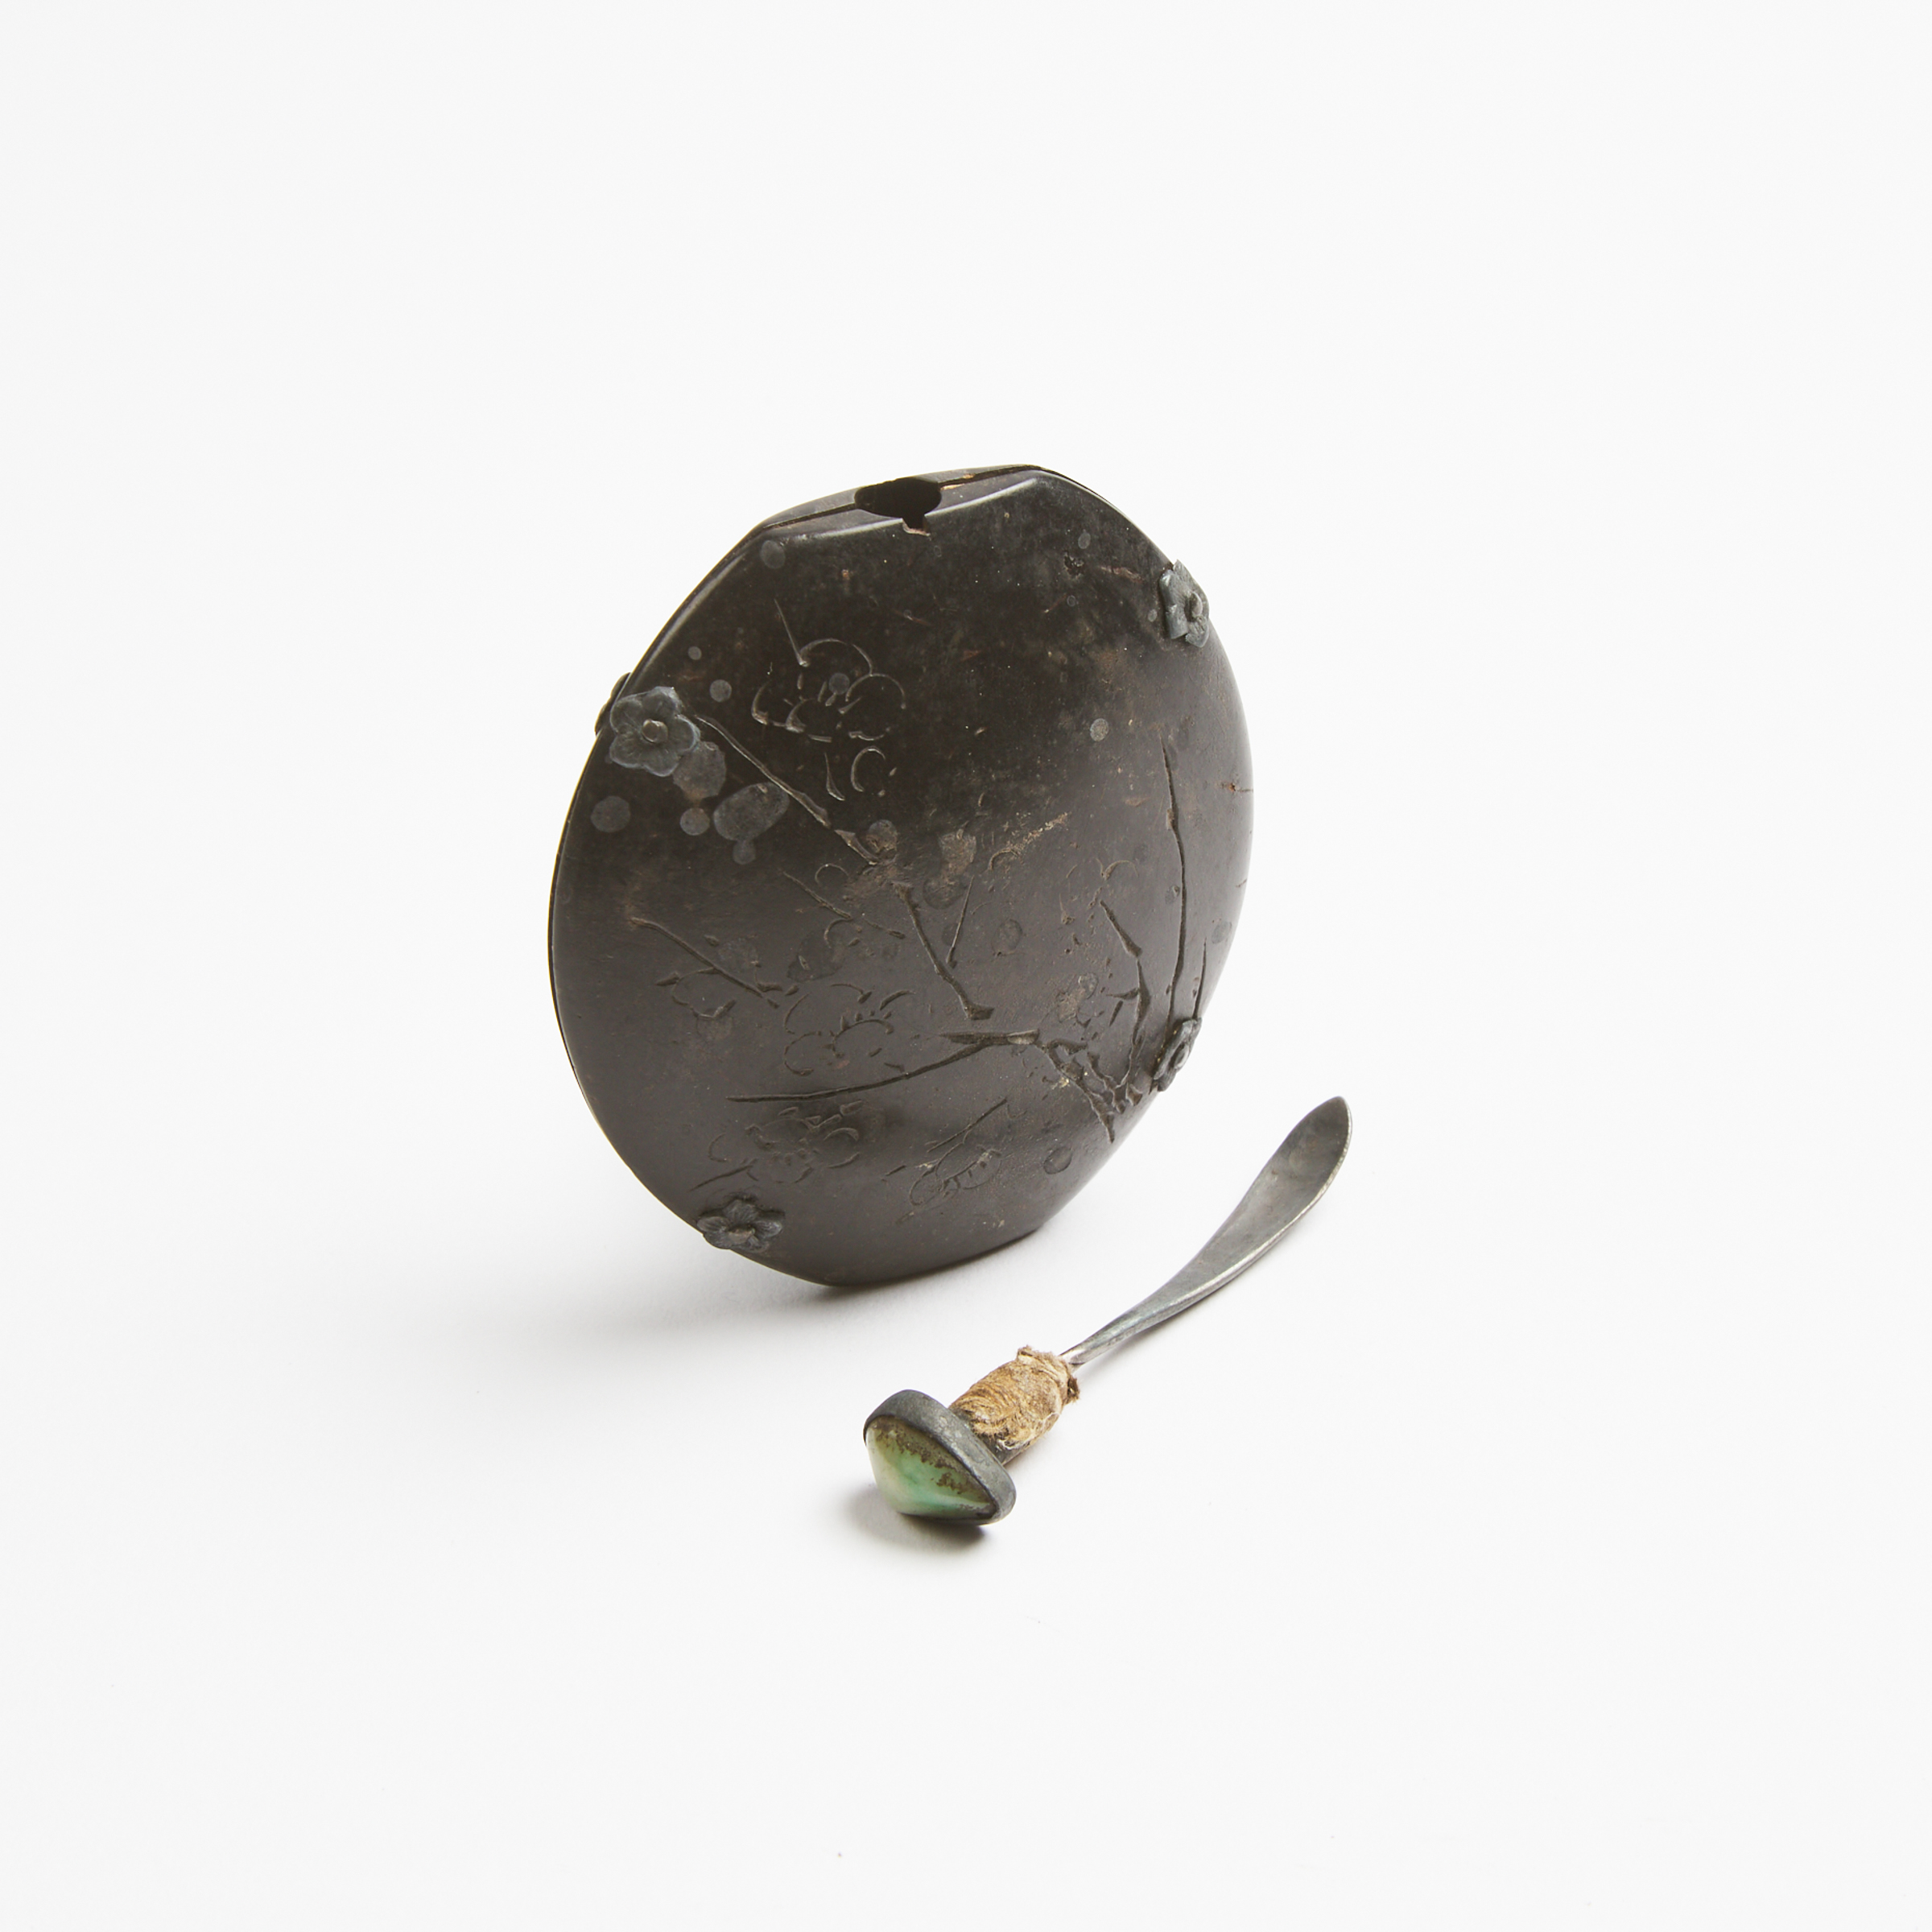 A Carved Coconut Shell 'Calligraphy and Plum Blossom' Snuff Bottle, Cyclically Dated 1870, Signed You Chen